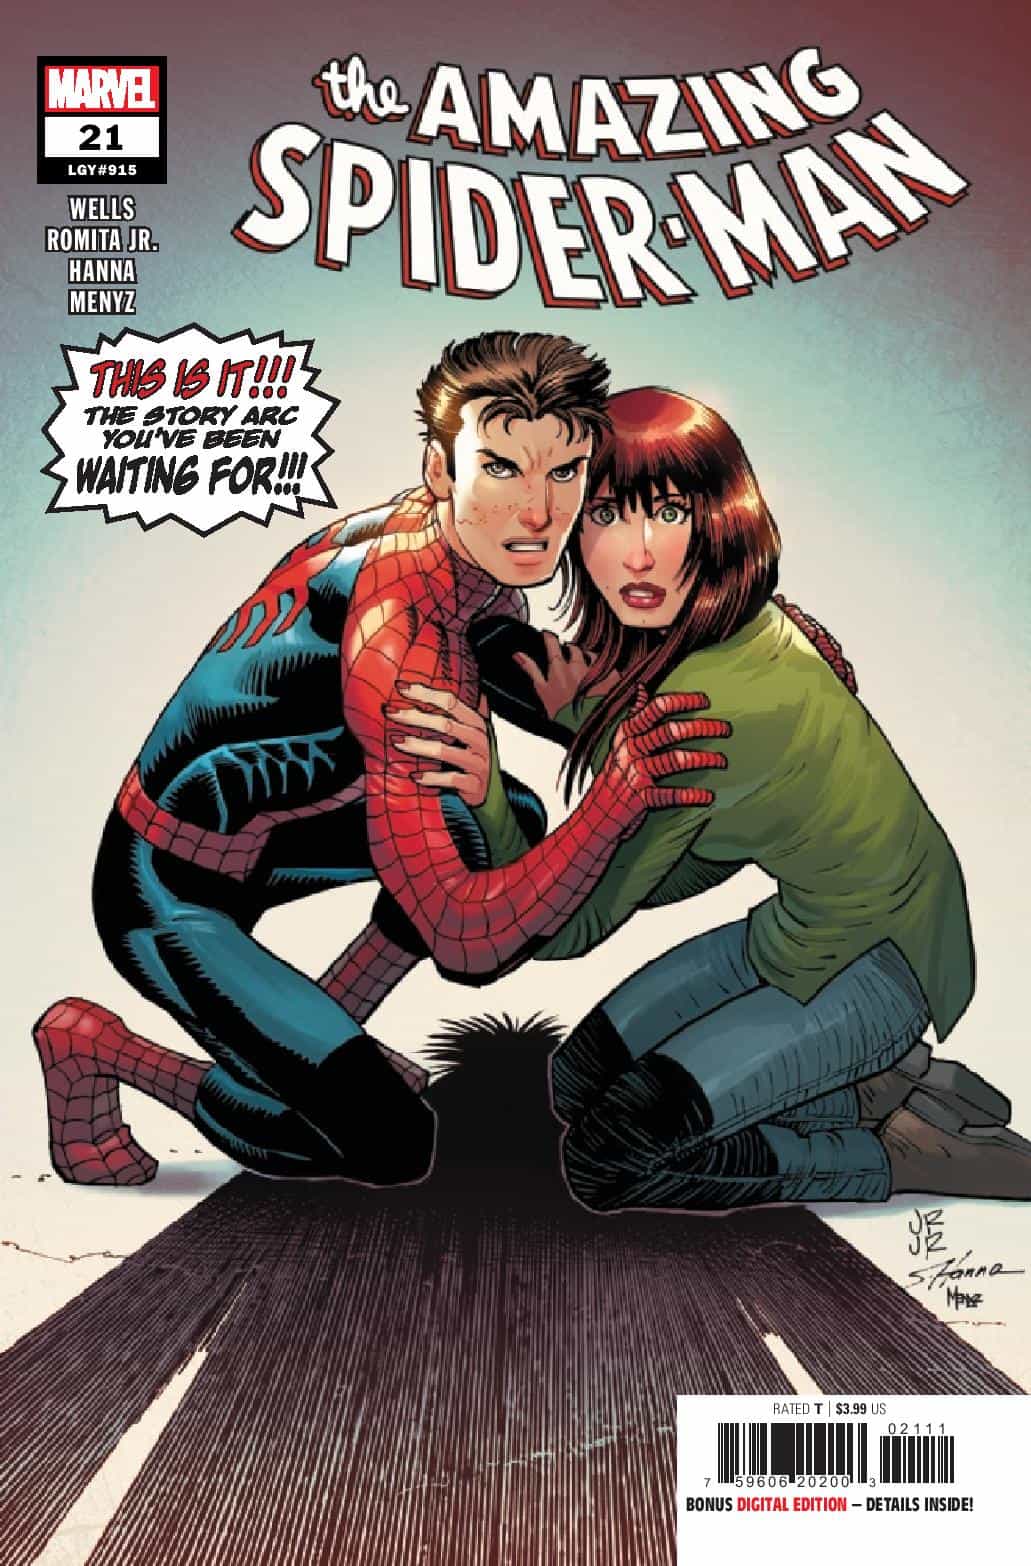 What Happened To Peter and Mary Jane? Revealed In AMAZING SPIDER-MAN #21! -  Comic Watch